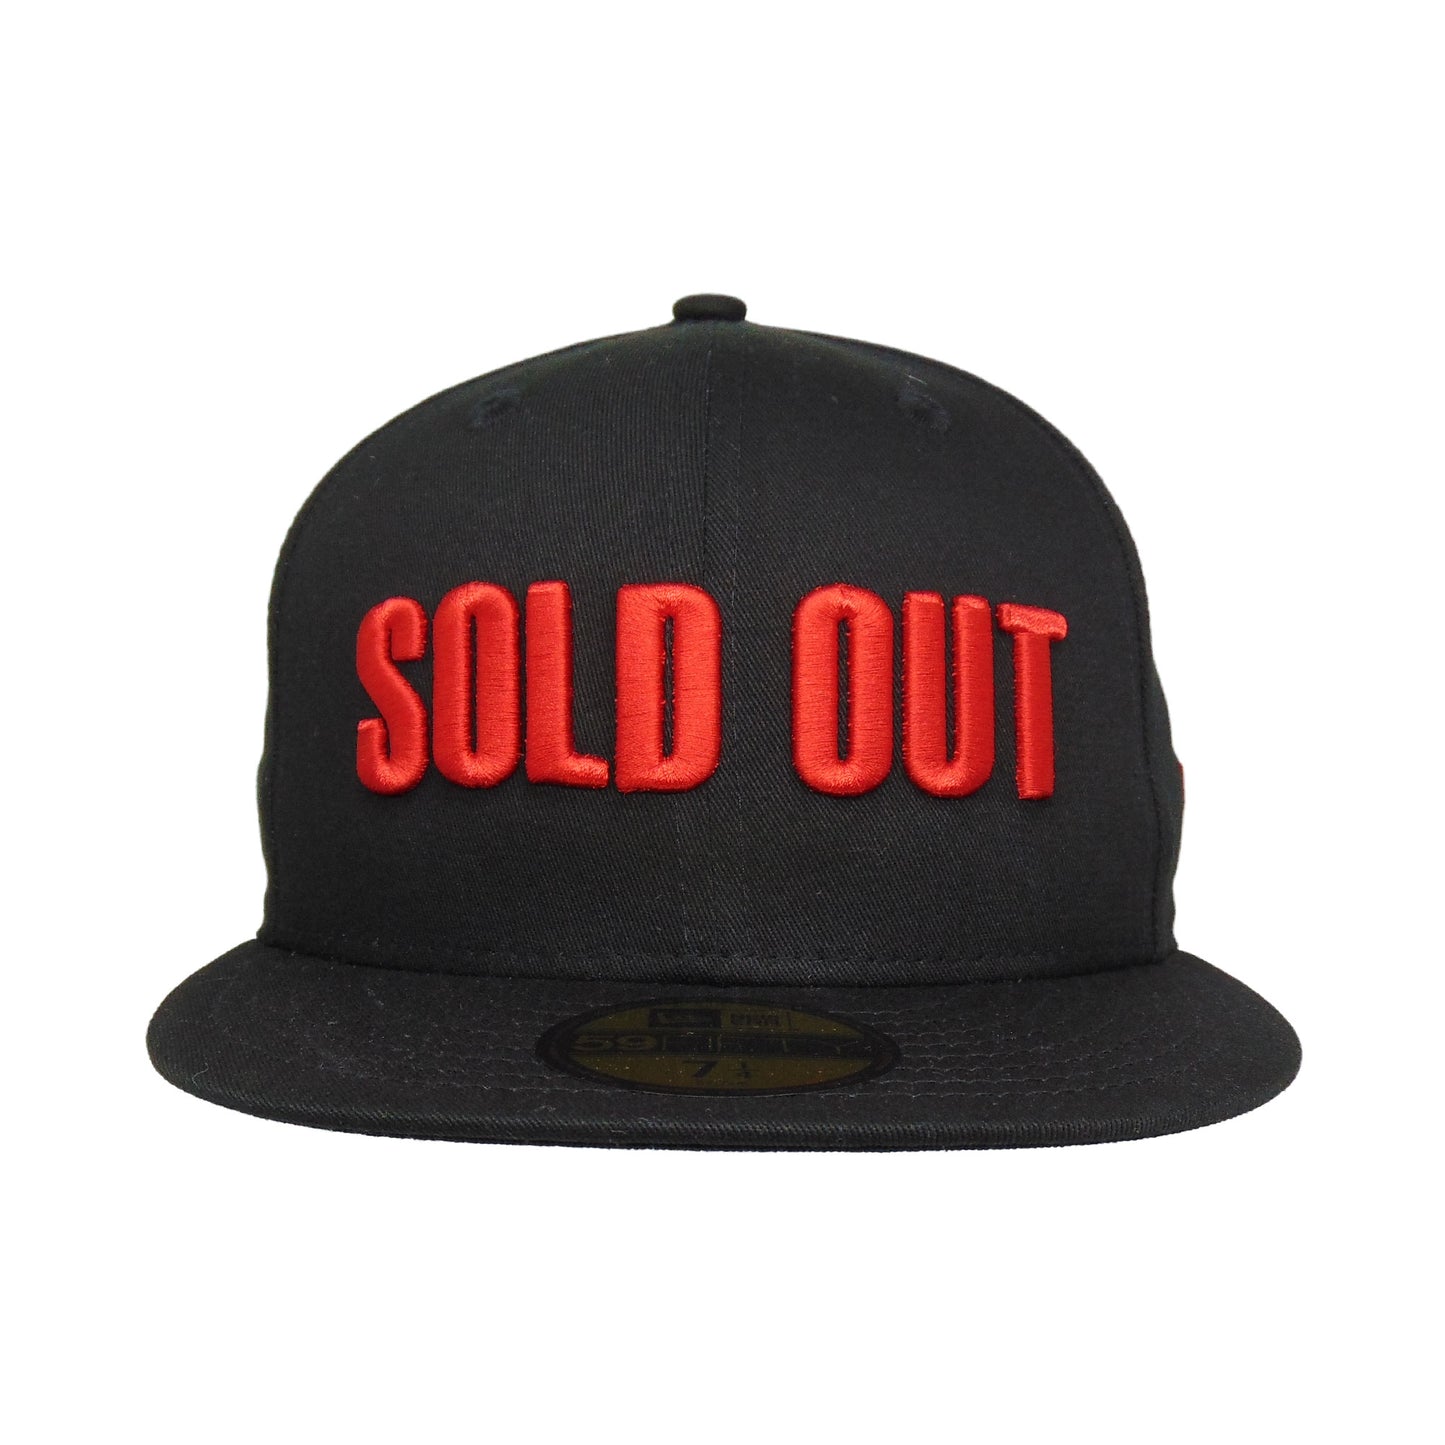 JustFitteds SOLD OUT New Era 59FIFTY Cap Black